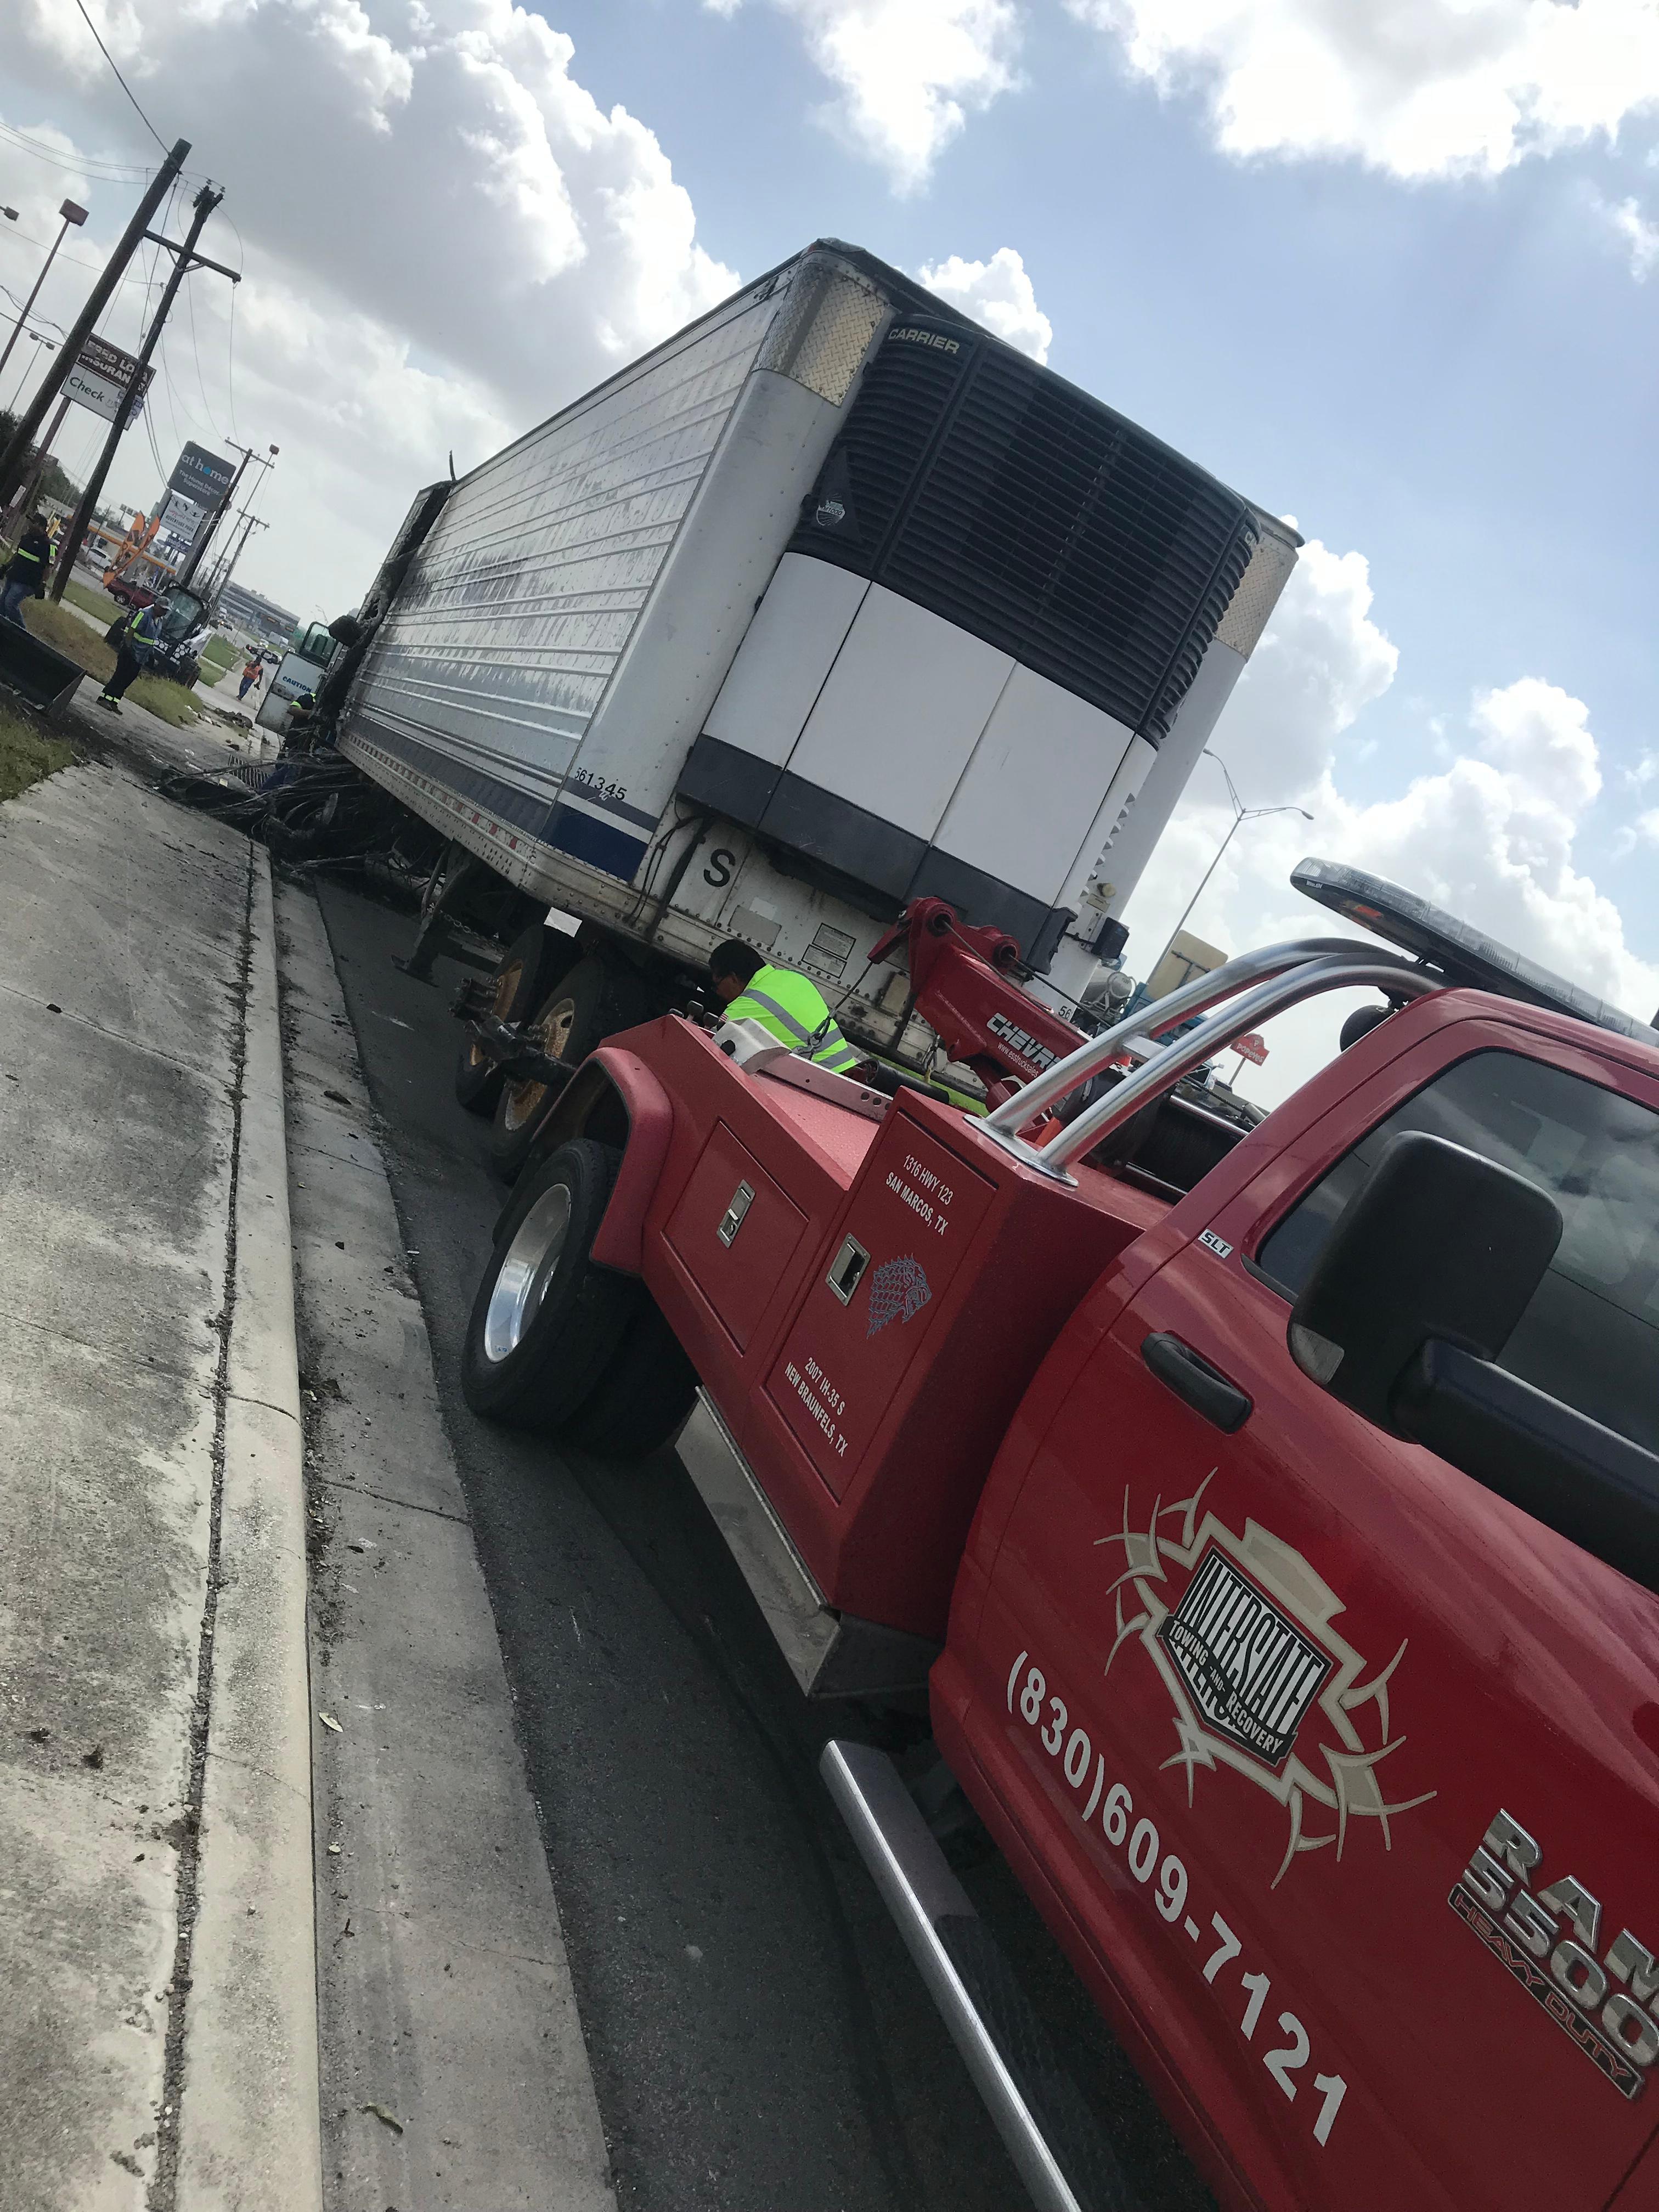 Interstate Towing and Recovery | (830) 609-7167 | New Braunfels TX | Towing & Recovery Services | Emergency Recovery | Heavy Duty Towing | Interstate Towing | Convenient Storage | Quick Response Times
Roadside Assistance | Fuel Delivery | Battery Service | 24 Hour Towing Service | Light Duty Towing | Medium Duty Towing | Flatbed Towing | Box Truck Towing | School Bus Towing | Classic Car Towing | Dually Towing | Exotic Towing | Junk Car Removal | Limousine Towing | Winching & Extraction | Wrecker Towing | Luxury Car Towing | Accident Recovery | Equipment Transportation | Moving Forklifts | Scissor Lifts Movers | Boom Lifts Movers | Bull Dozers Movers | Excavators Movers
Compressors Movers | Loadshifts | Wide Loads Transportation | Exotic Car & Sport Car Towing | Long Distance Towing | Auto Transport | Tipsy Towing | Lockouts | Jump Starts | Motorcycle Towing